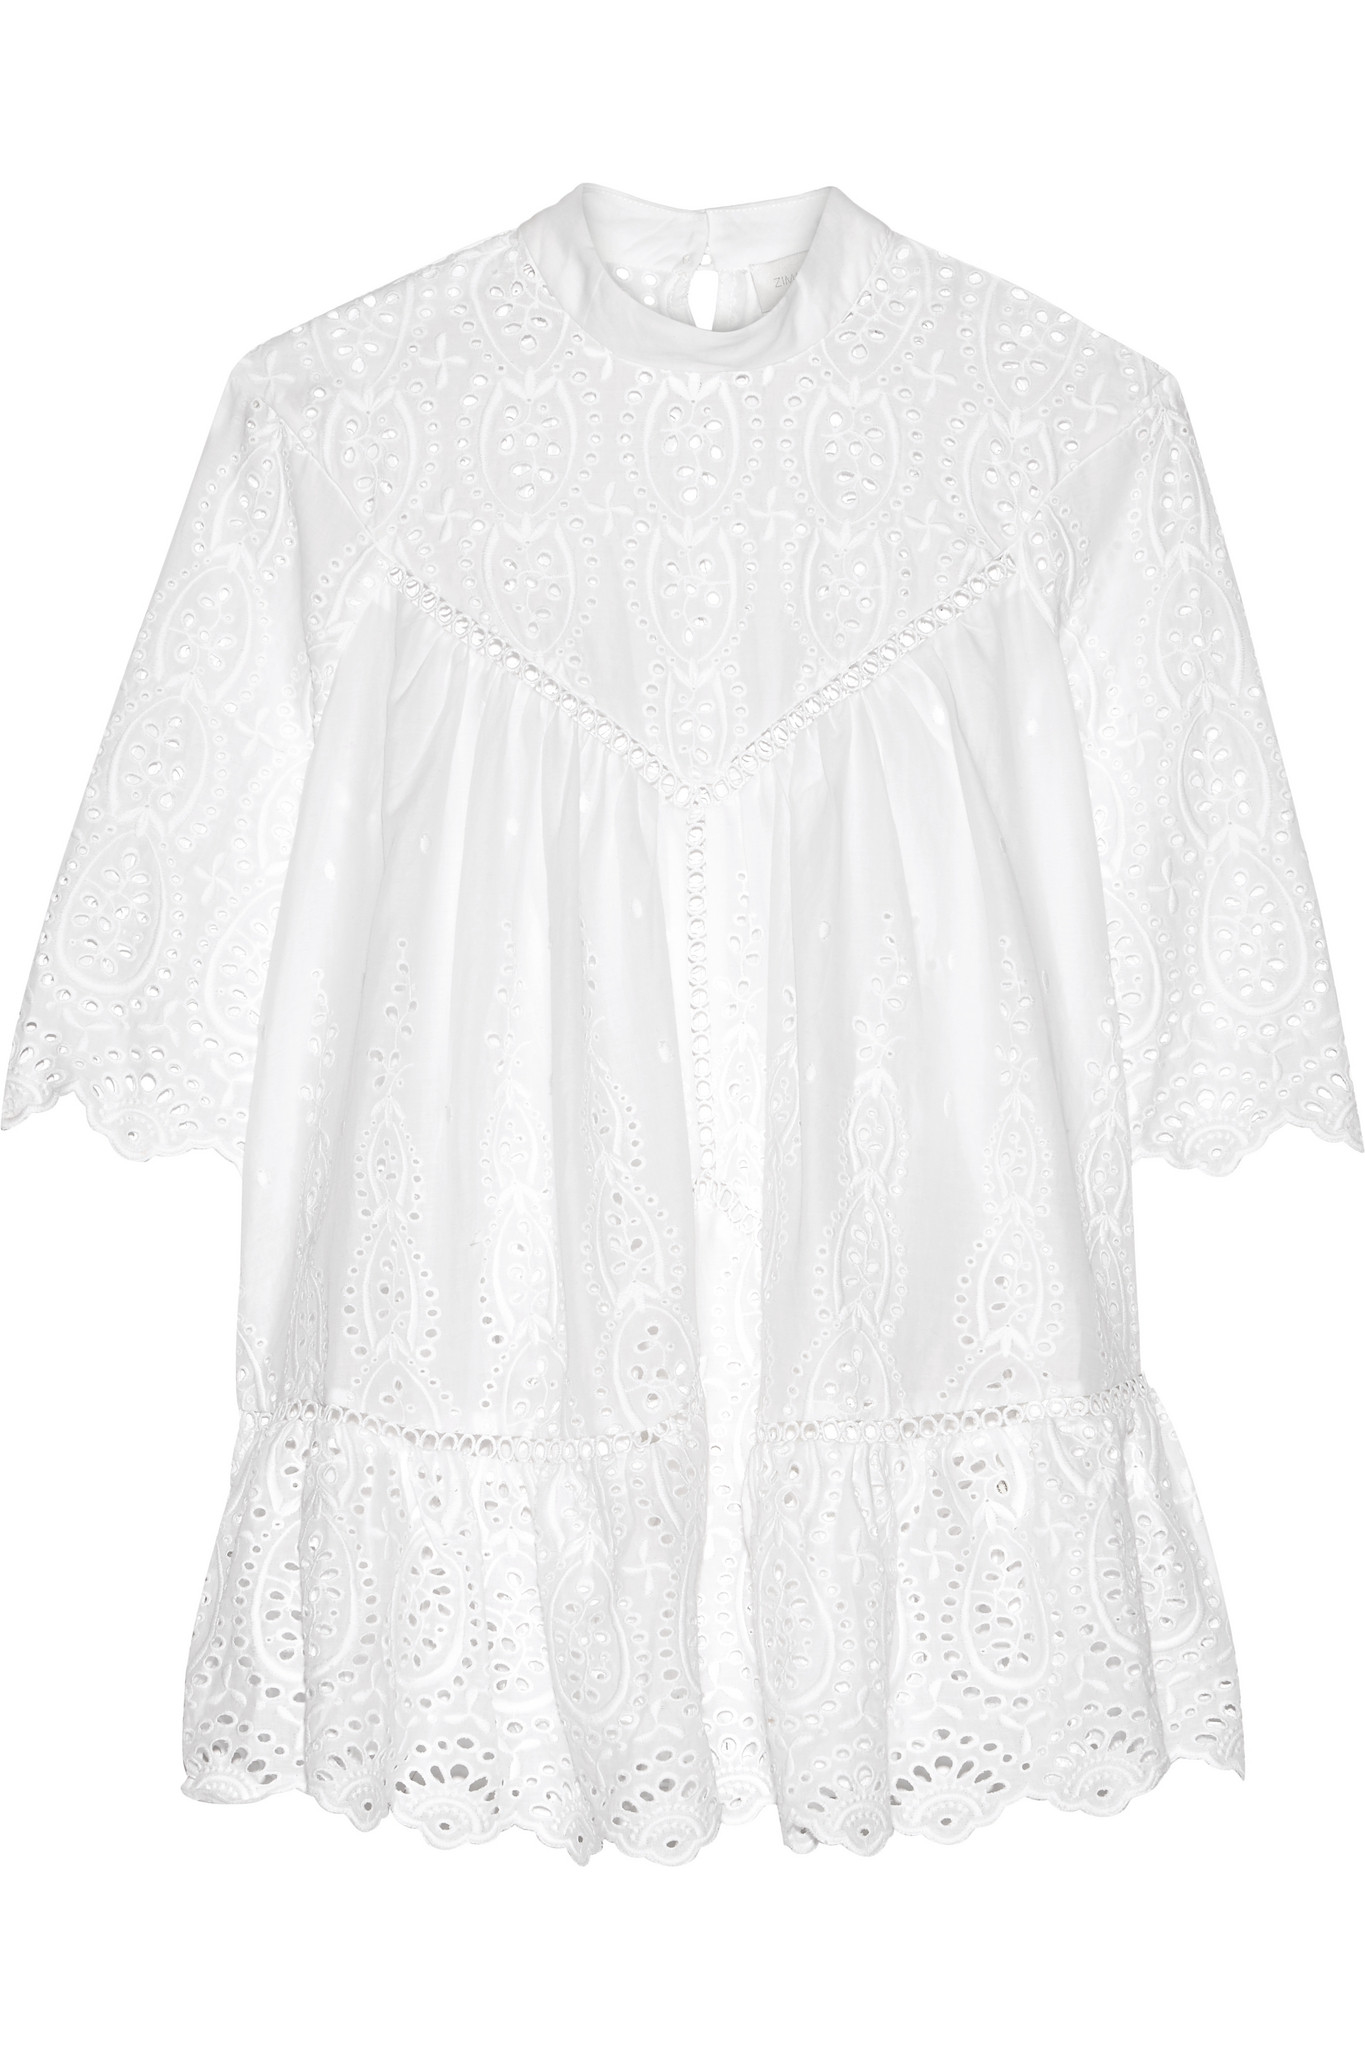 Zimmermann Epoque Broderie Anglaise Cotton Top in White | Lyst UK